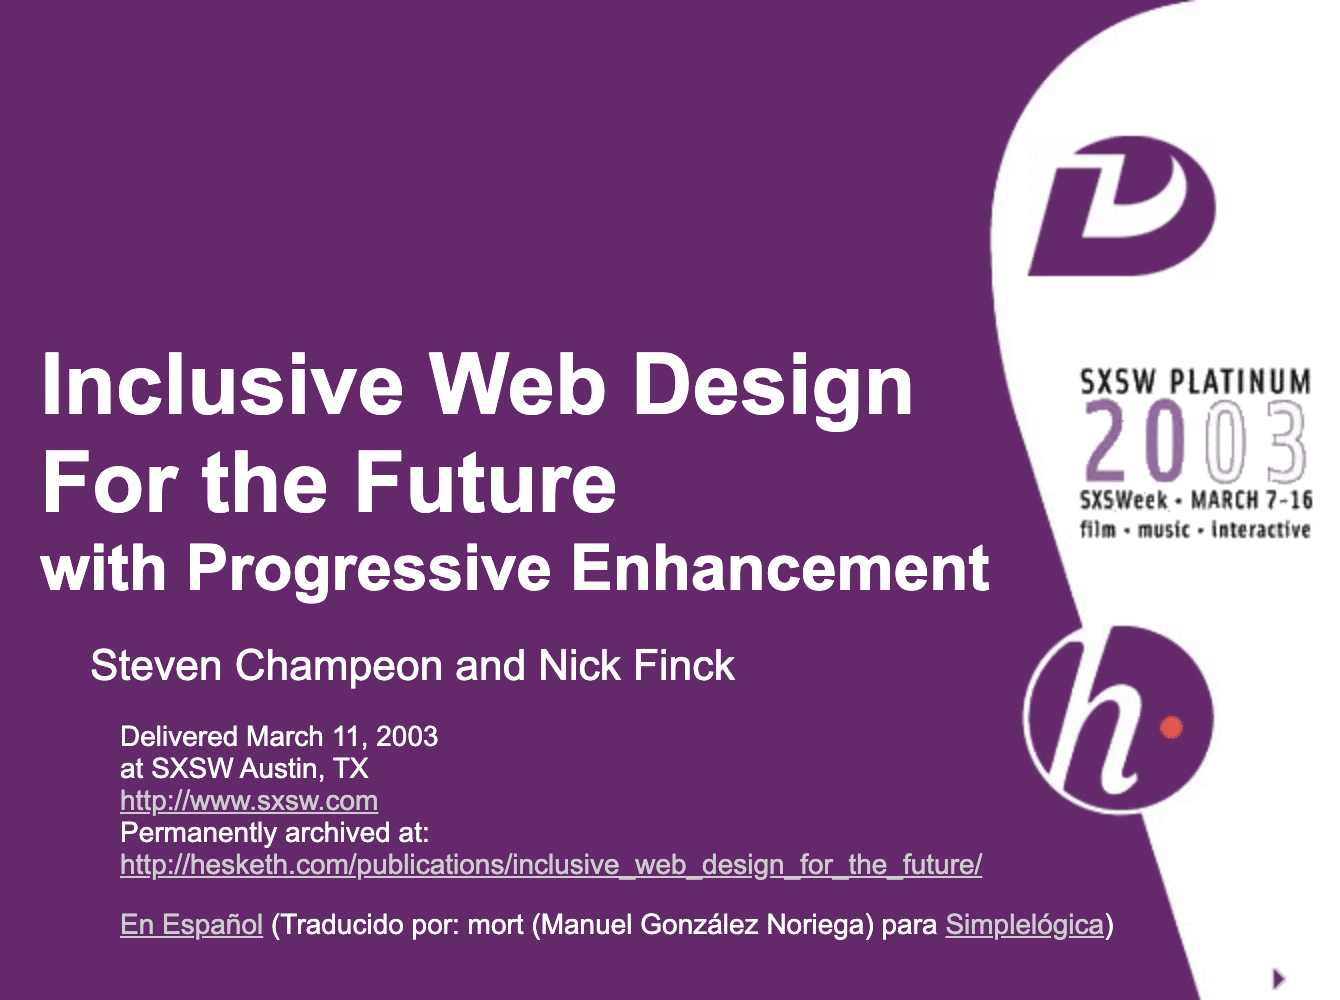 Inclusive web design for the future with progressive enhancement. Title slide from Finck and Champeon's original presentation.